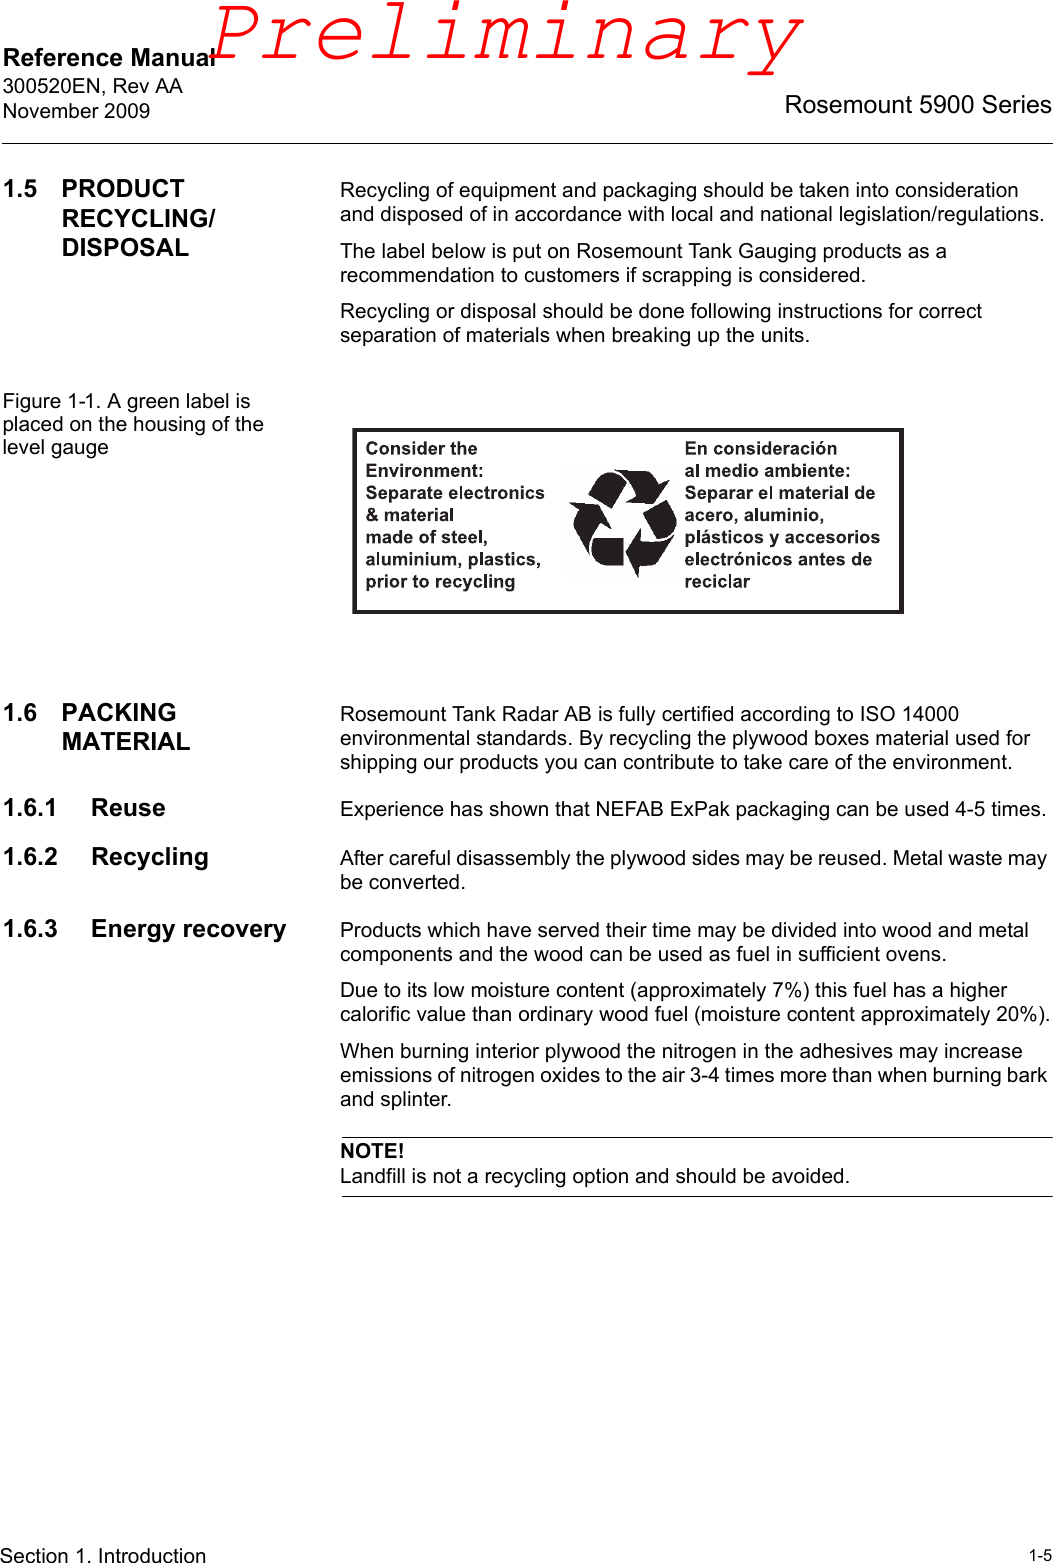 Reference Manual 300520EN, Rev AANovember 20091-5Rosemount 5900 SeriesSection 1. Introduction1.5 PRODUCT RECYCLING/DISPOSALRecycling of equipment and packaging should be taken into consideration and disposed of in accordance with local and national legislation/regulations.The label below is put on Rosemount Tank Gauging products as a recommendation to customers if scrapping is considered.Recycling or disposal should be done following instructions for correct separation of materials when breaking up the units.Figure 1-1. A green label is placed on the housing of the level gauge1.6 PACKING MATERIALRosemount Tank Radar AB is fully certified according to ISO 14000 environmental standards. By recycling the plywood boxes material used for shipping our products you can contribute to take care of the environment.1.6.1 Reuse Experience has shown that NEFAB ExPak packaging can be used 4-5 times.1.6.2 Recycling After careful disassembly the plywood sides may be reused. Metal waste may be converted.1.6.3 Energy recovery Products which have served their time may be divided into wood and metal components and the wood can be used as fuel in sufficient ovens.Due to its low moisture content (approximately 7%) this fuel has a higher calorific value than ordinary wood fuel (moisture content approximately 20%).When burning interior plywood the nitrogen in the adhesives may increase emissions of nitrogen oxides to the air 3-4 times more than when burning bark and splinter.NOTE!Landfill is not a recycling option and should be avoided.Preliminary